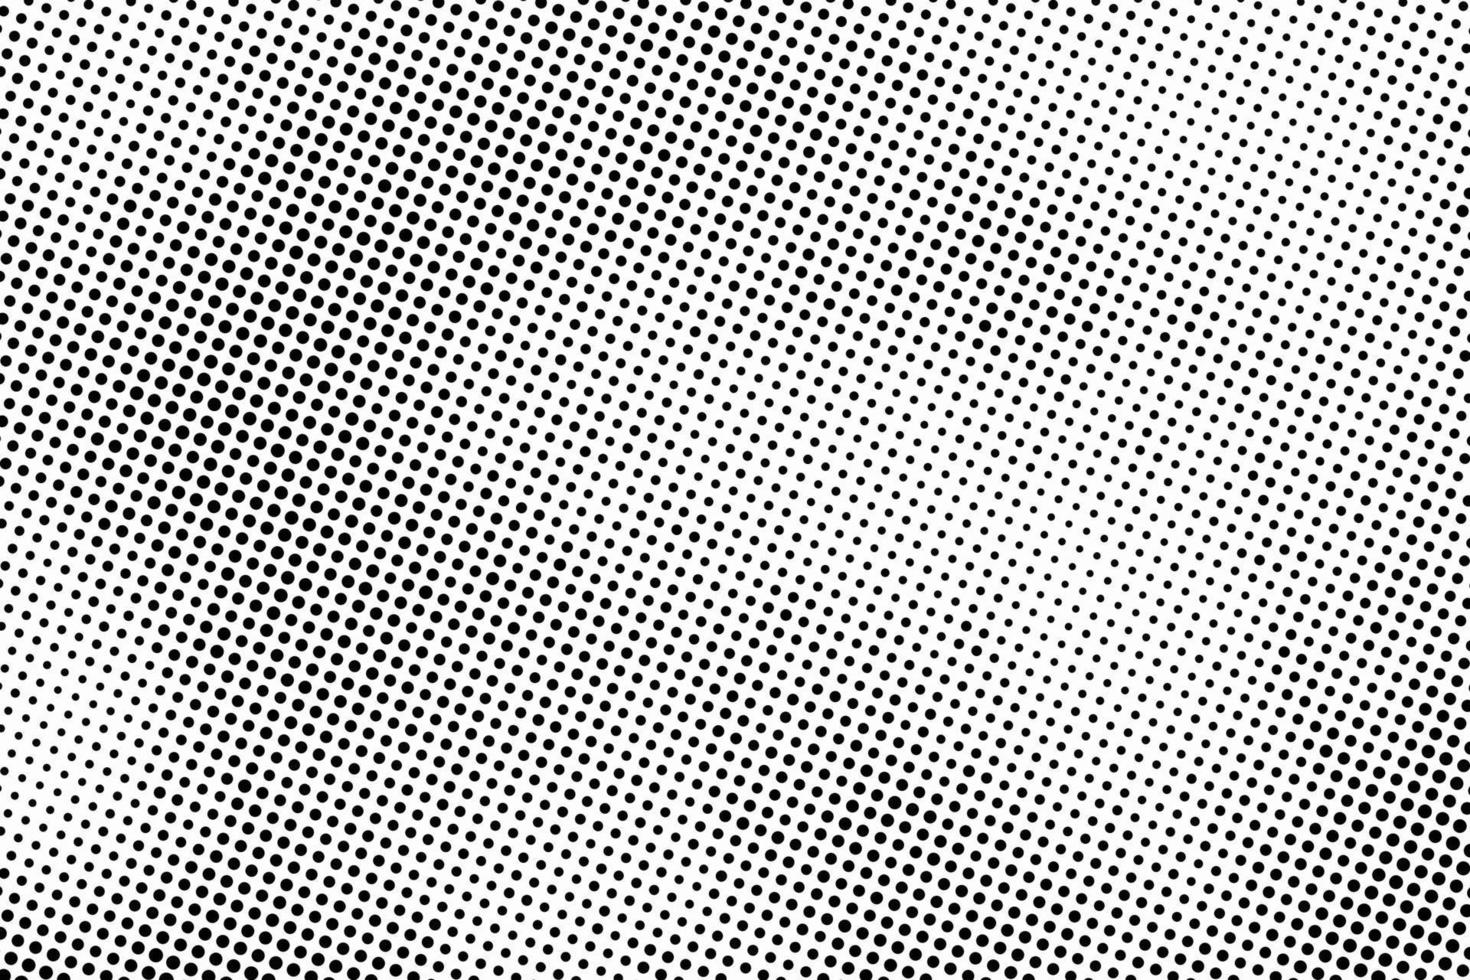 Vector halftone texture effect pattern background.